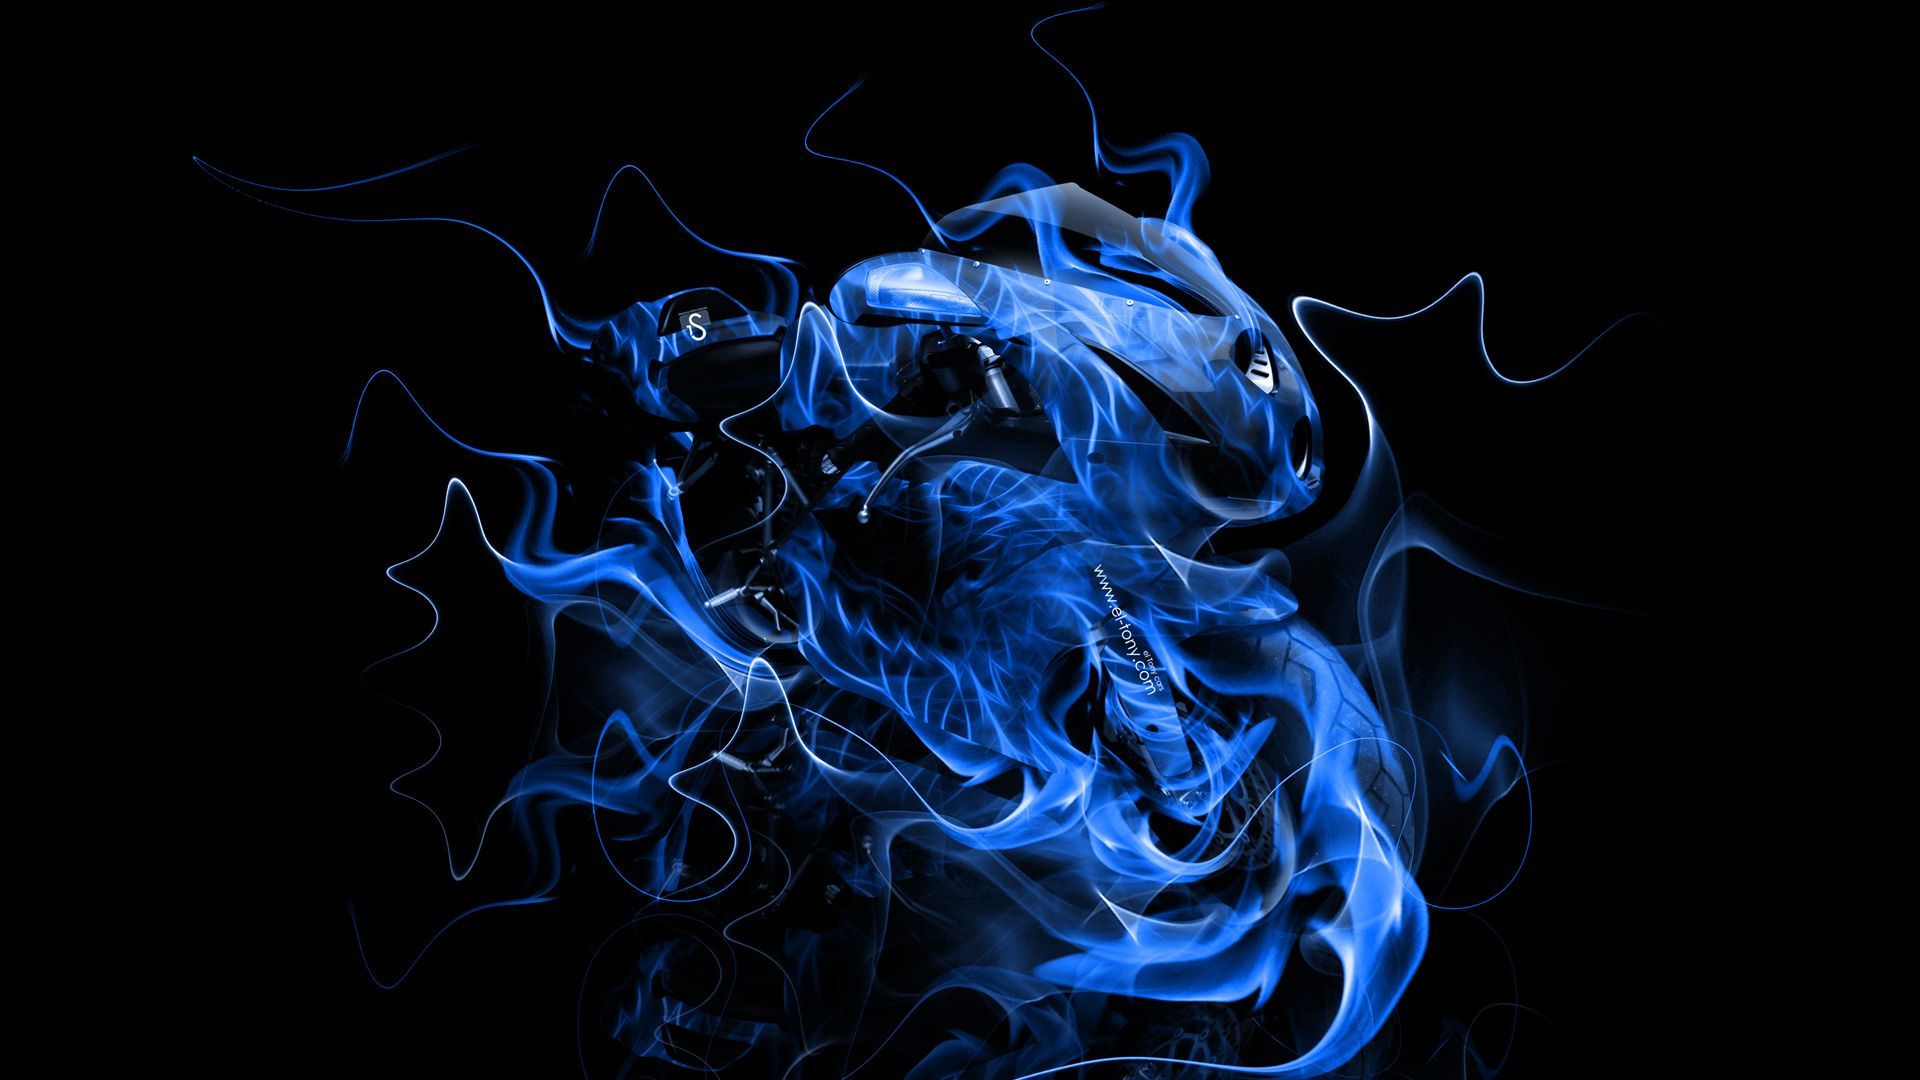 Wallpaper ID 508730  flame blue fire abstract fantasy flamin skull blue  flames resolution art higher its so cool blue fire 480P blue flame  skull hd free download